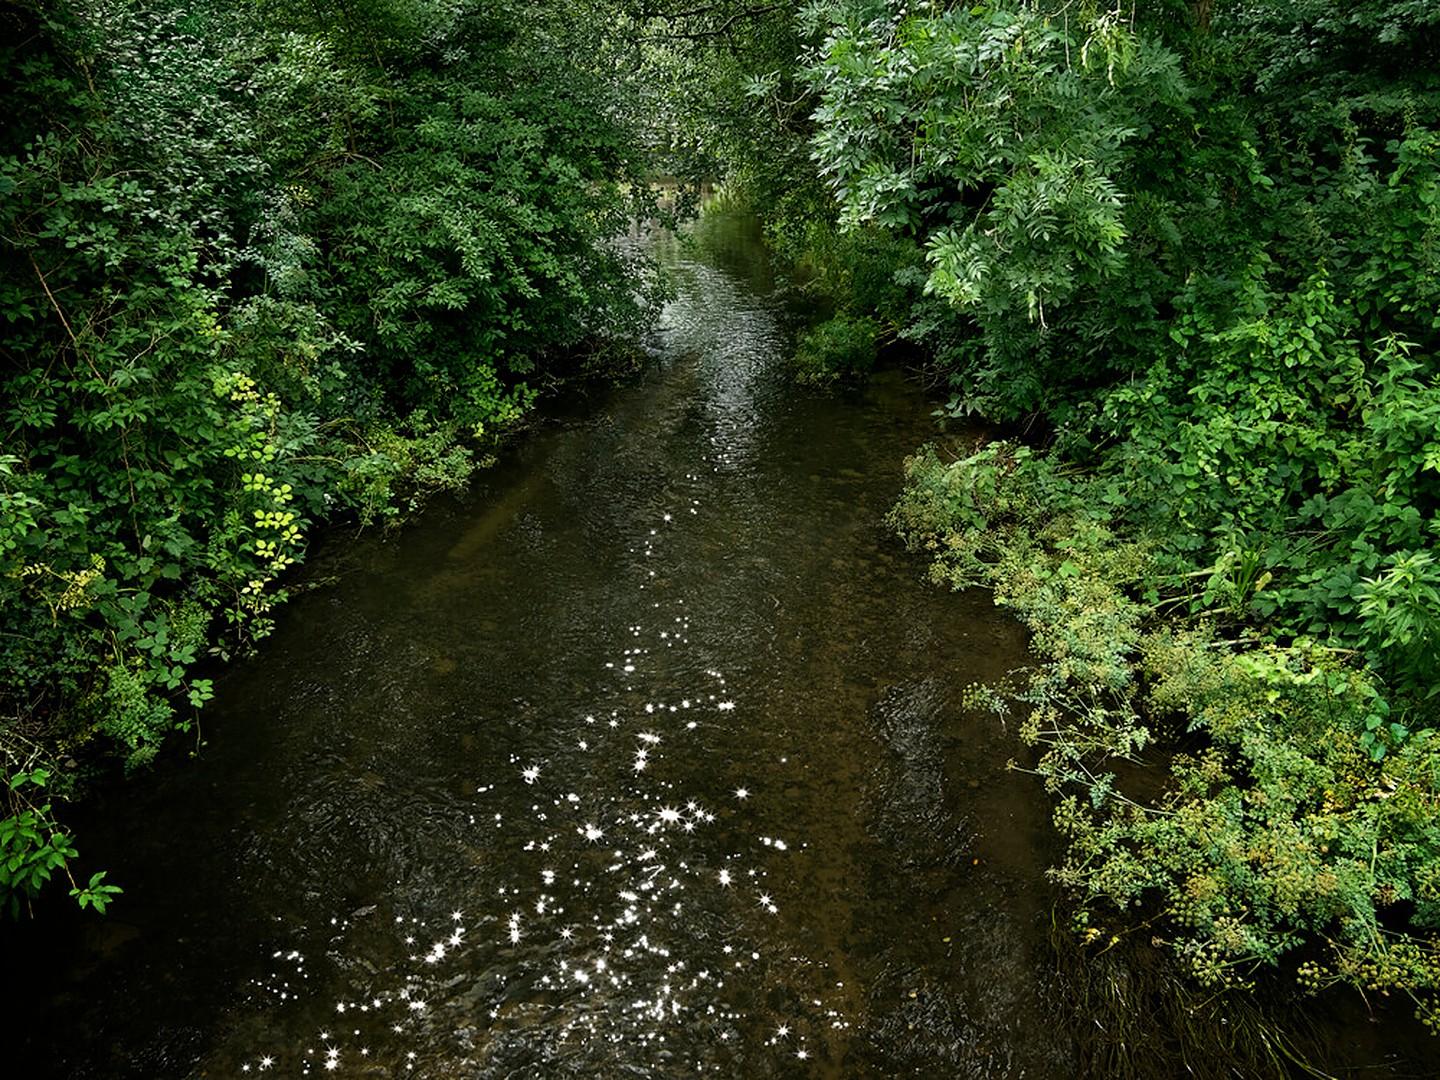 All prints are produced to order and lead times are expected between 15-20 days.

Chalk Streams 5 is a stunning C-Type Print on Fuji Crystal Archive Paper in Maxima Matte. This size print is available in an Edition of 7 + 2 Artist Proofs.

In her